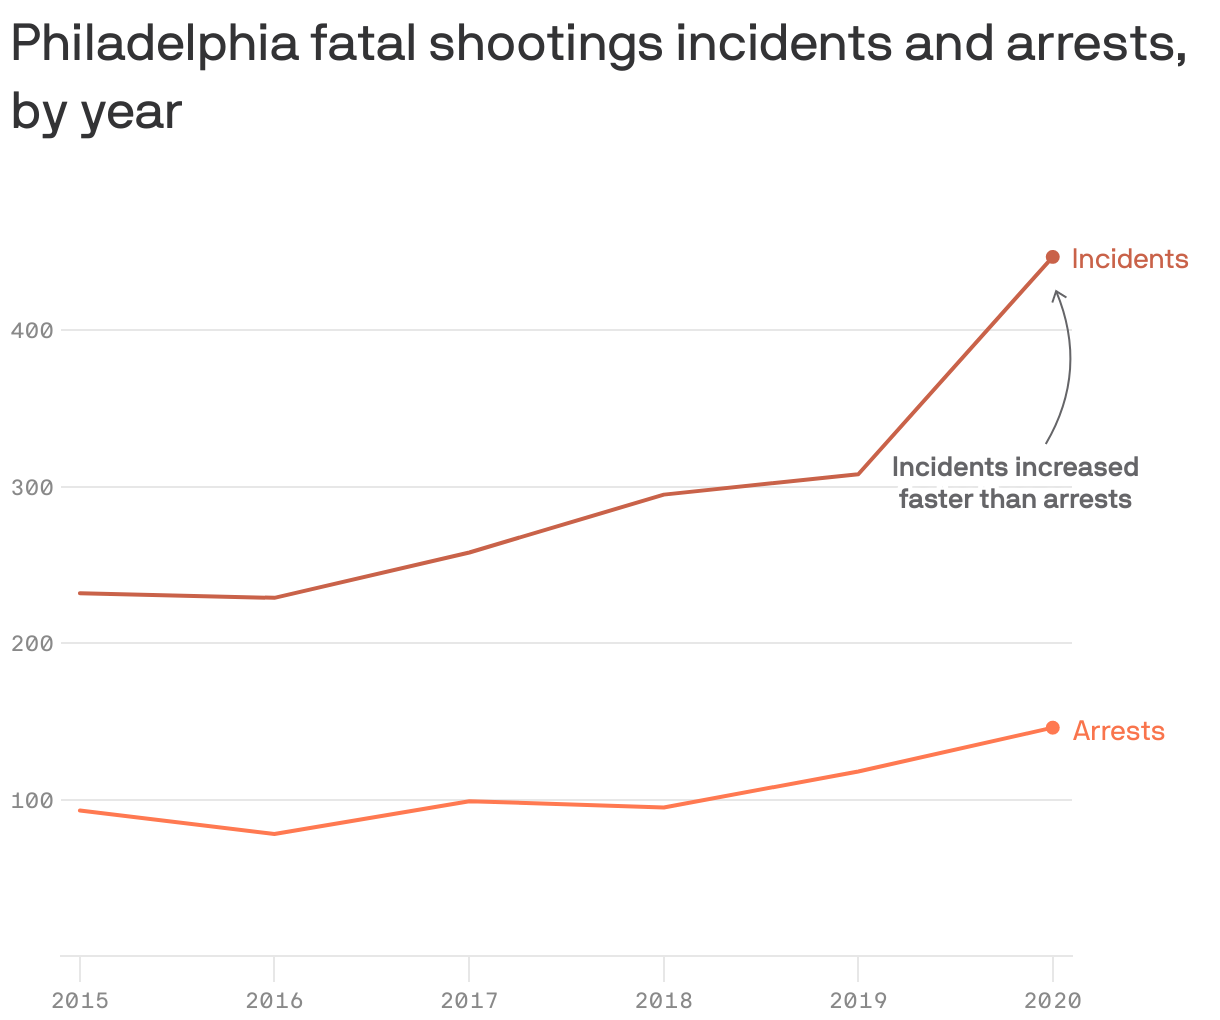 Philadelphia fatal shootings incidents and arrests, by year